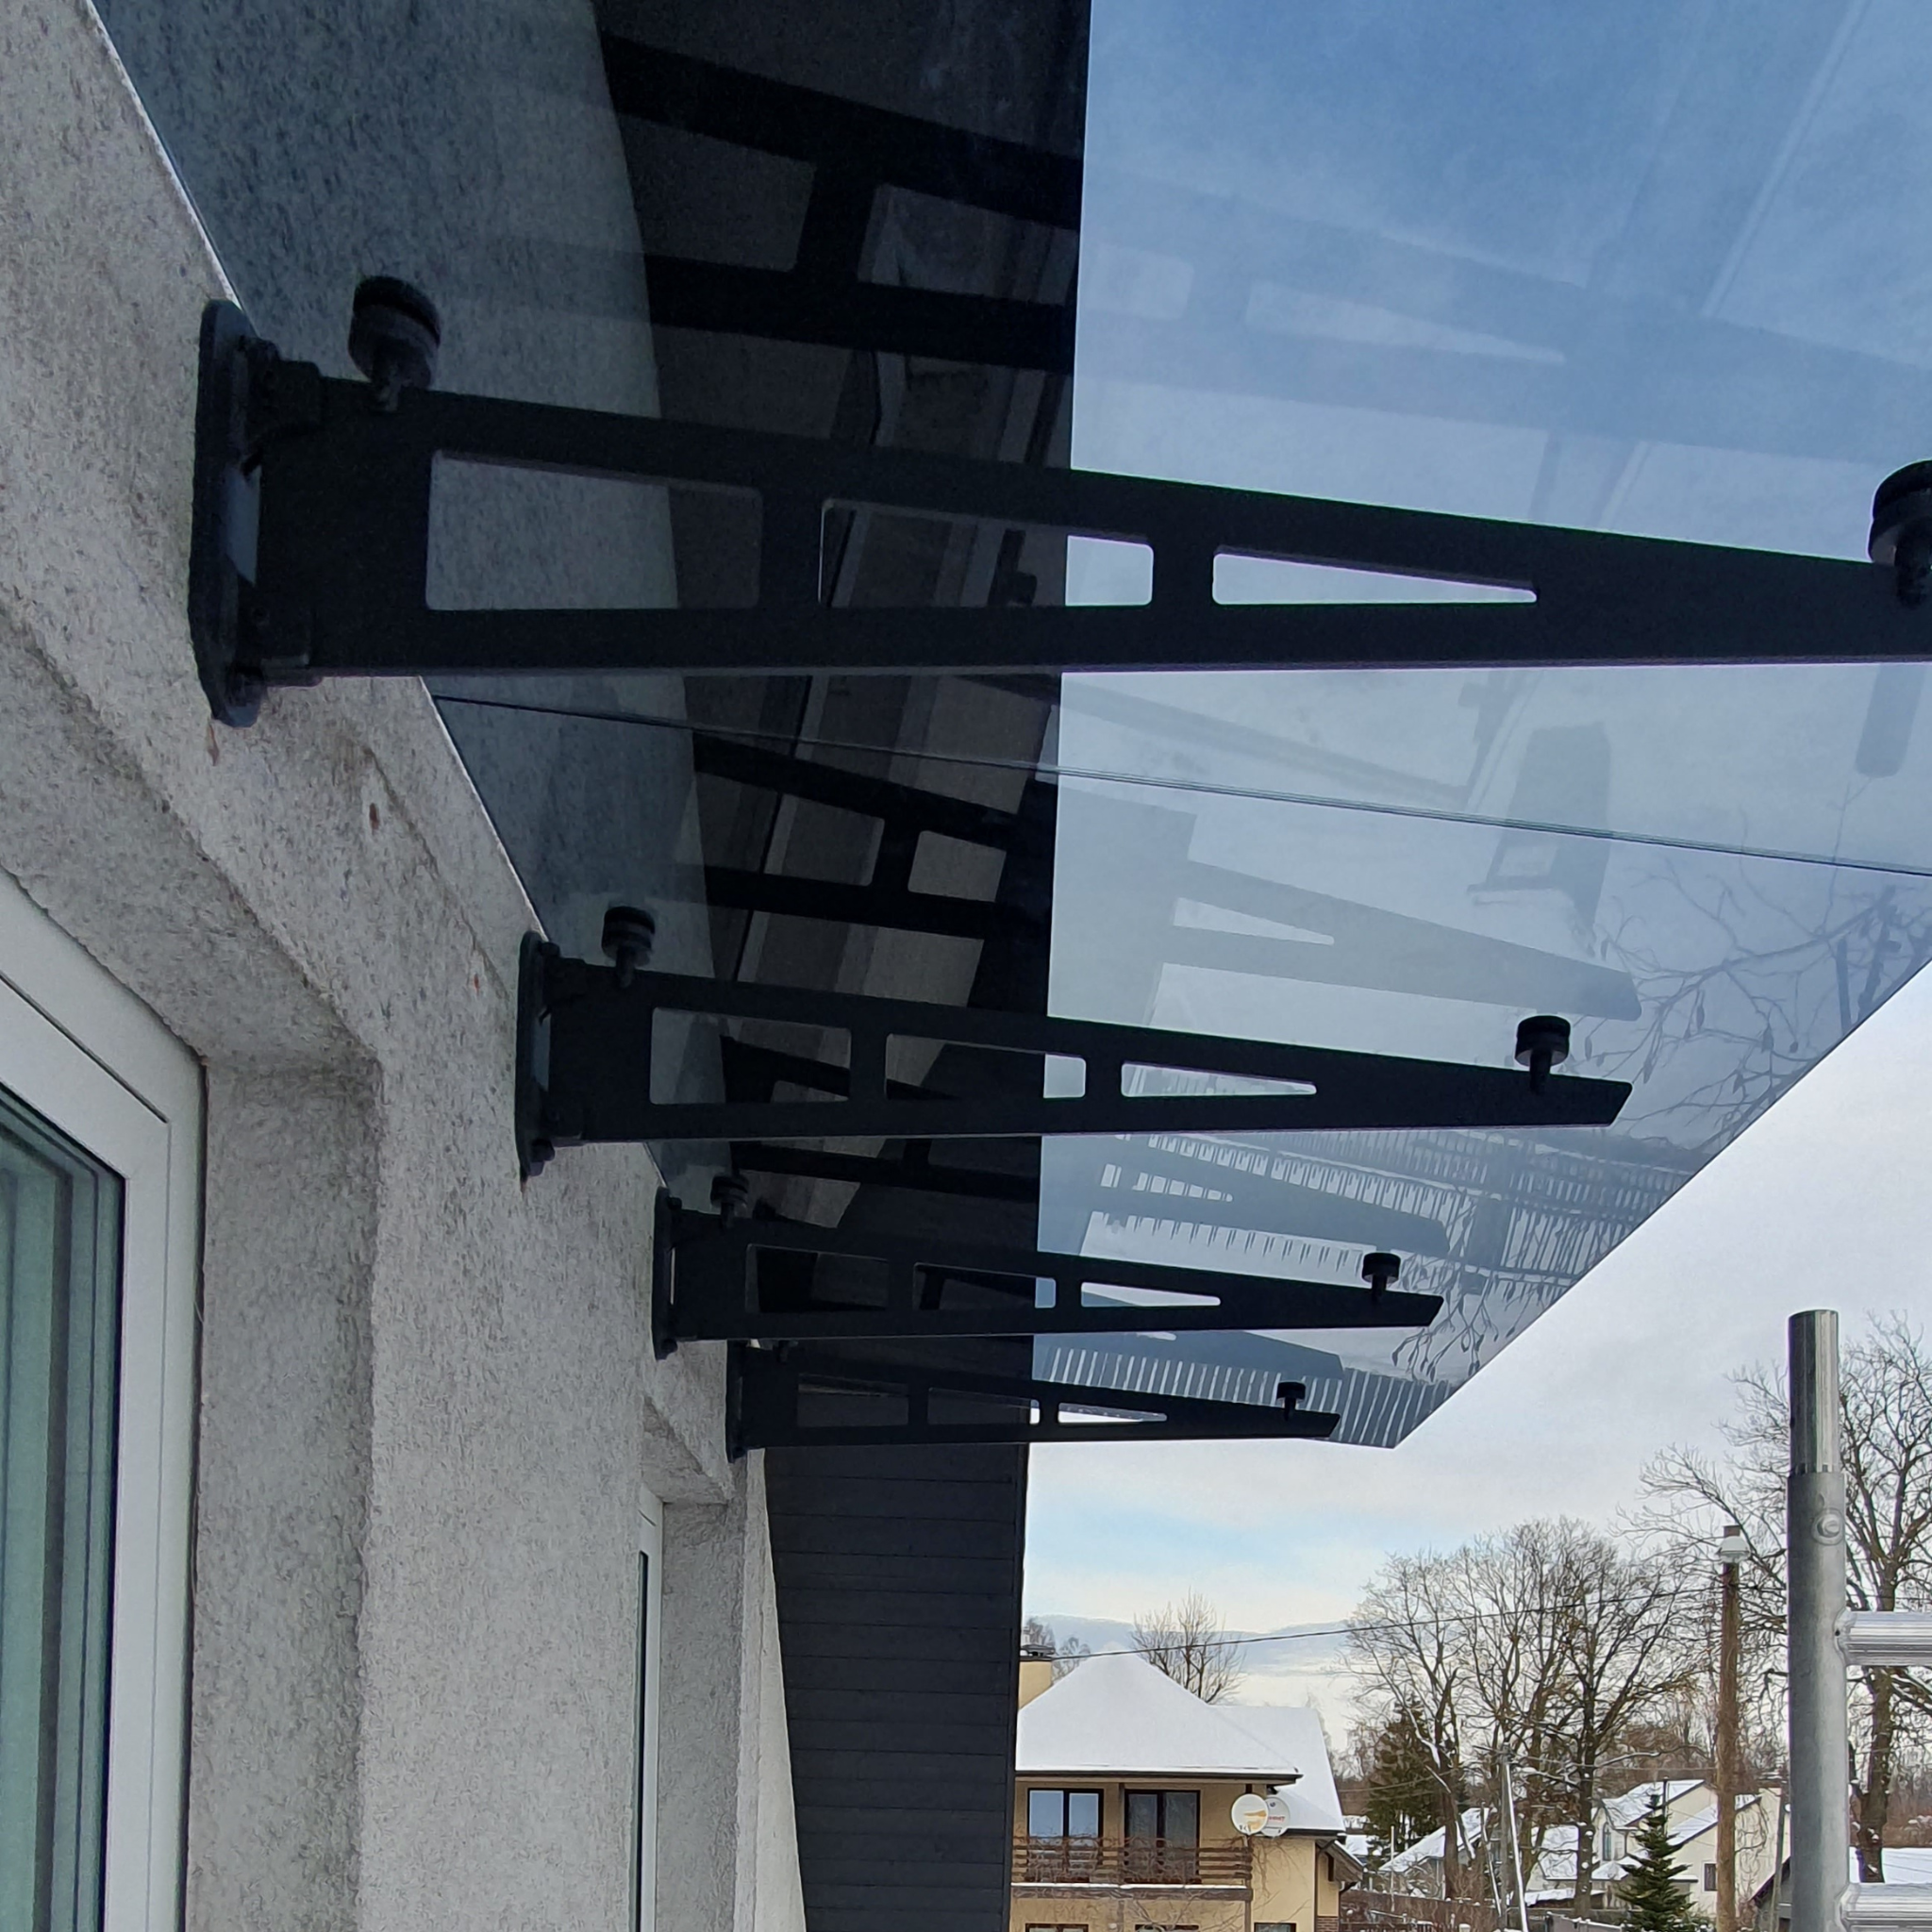 Glass canopy on 2 supports - StroFIX